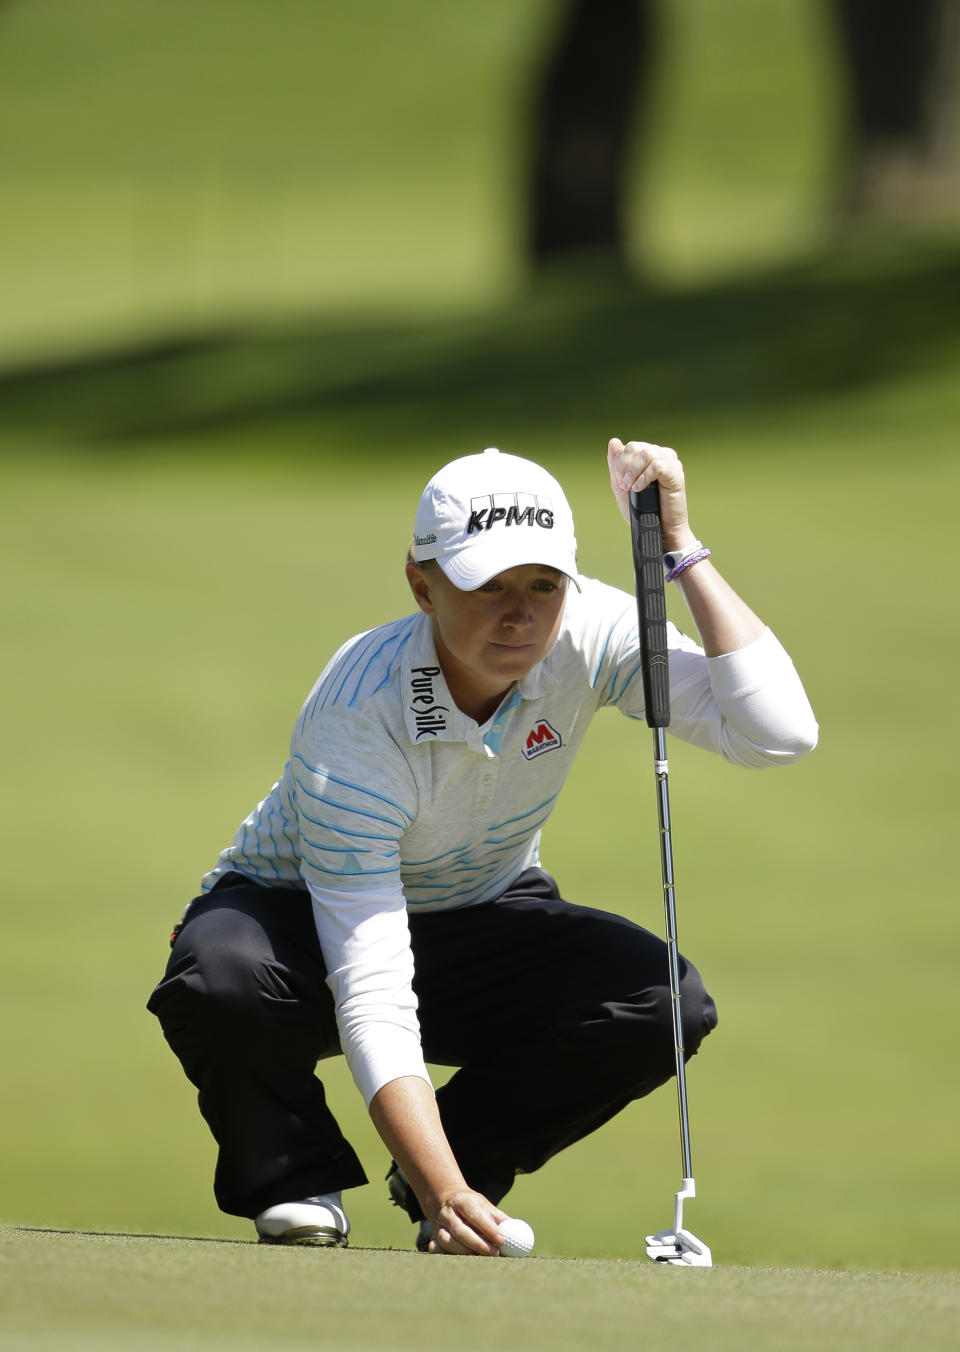 Stacy Lewis lines up a putt on the fifth green of Lake Merced Golf Club during the final round of the Swinging Skirts LPGA Classic golf tournament on Sunday, April 27, 2014, in Daly City, Calif. (AP Photo/Eric Risberg)